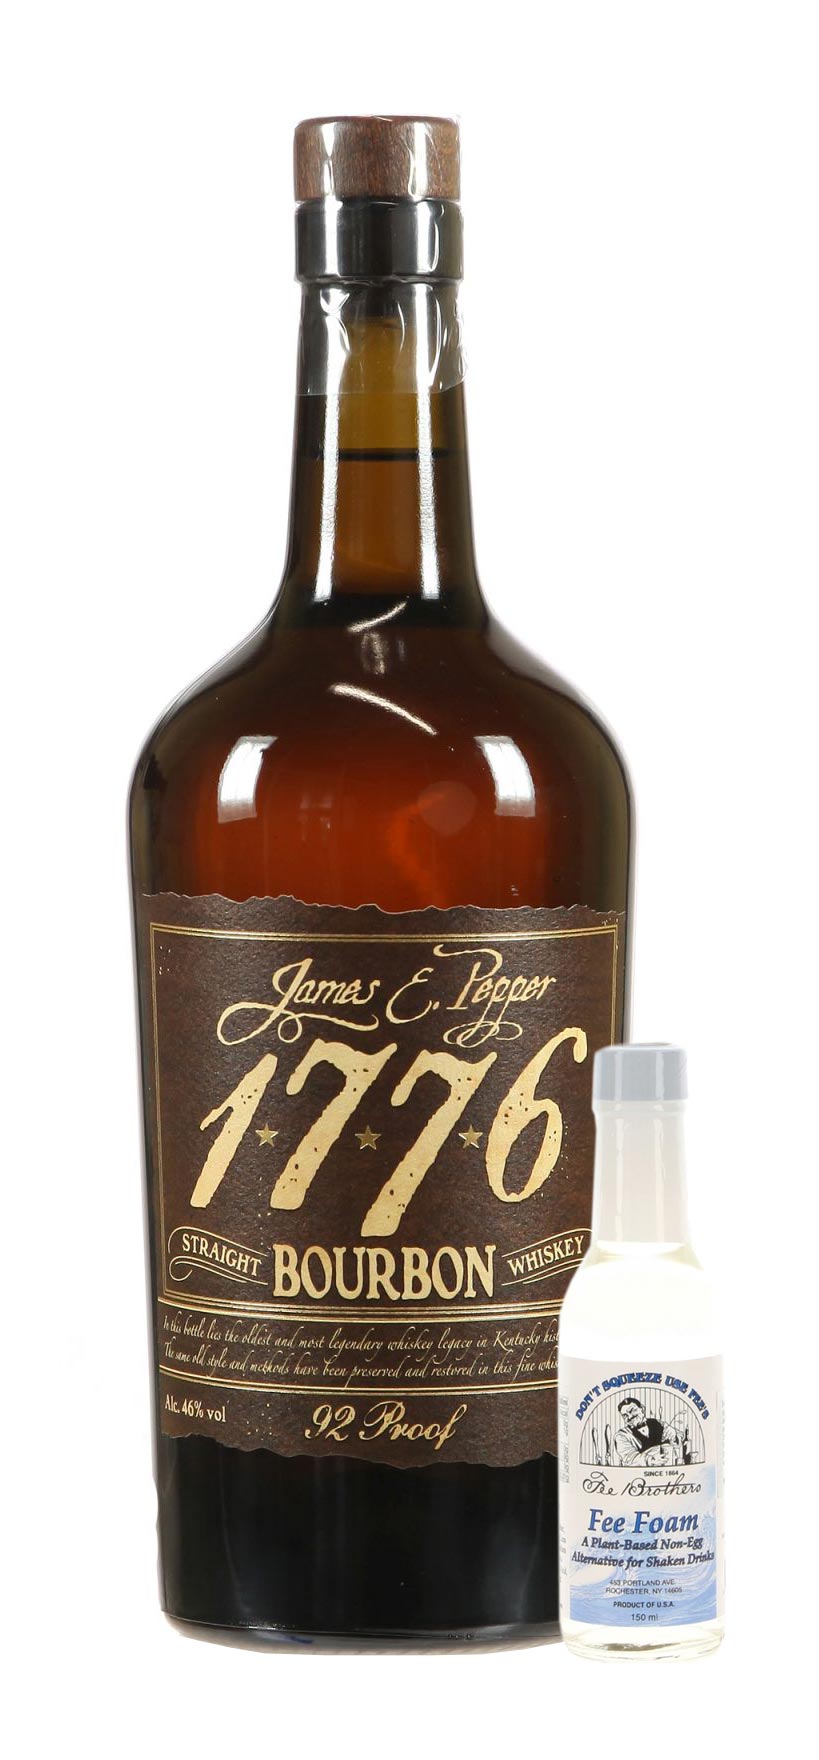 Bourbon the incl. » 1776 Foam online | Fee Fee store free To Whisky.de Brothers